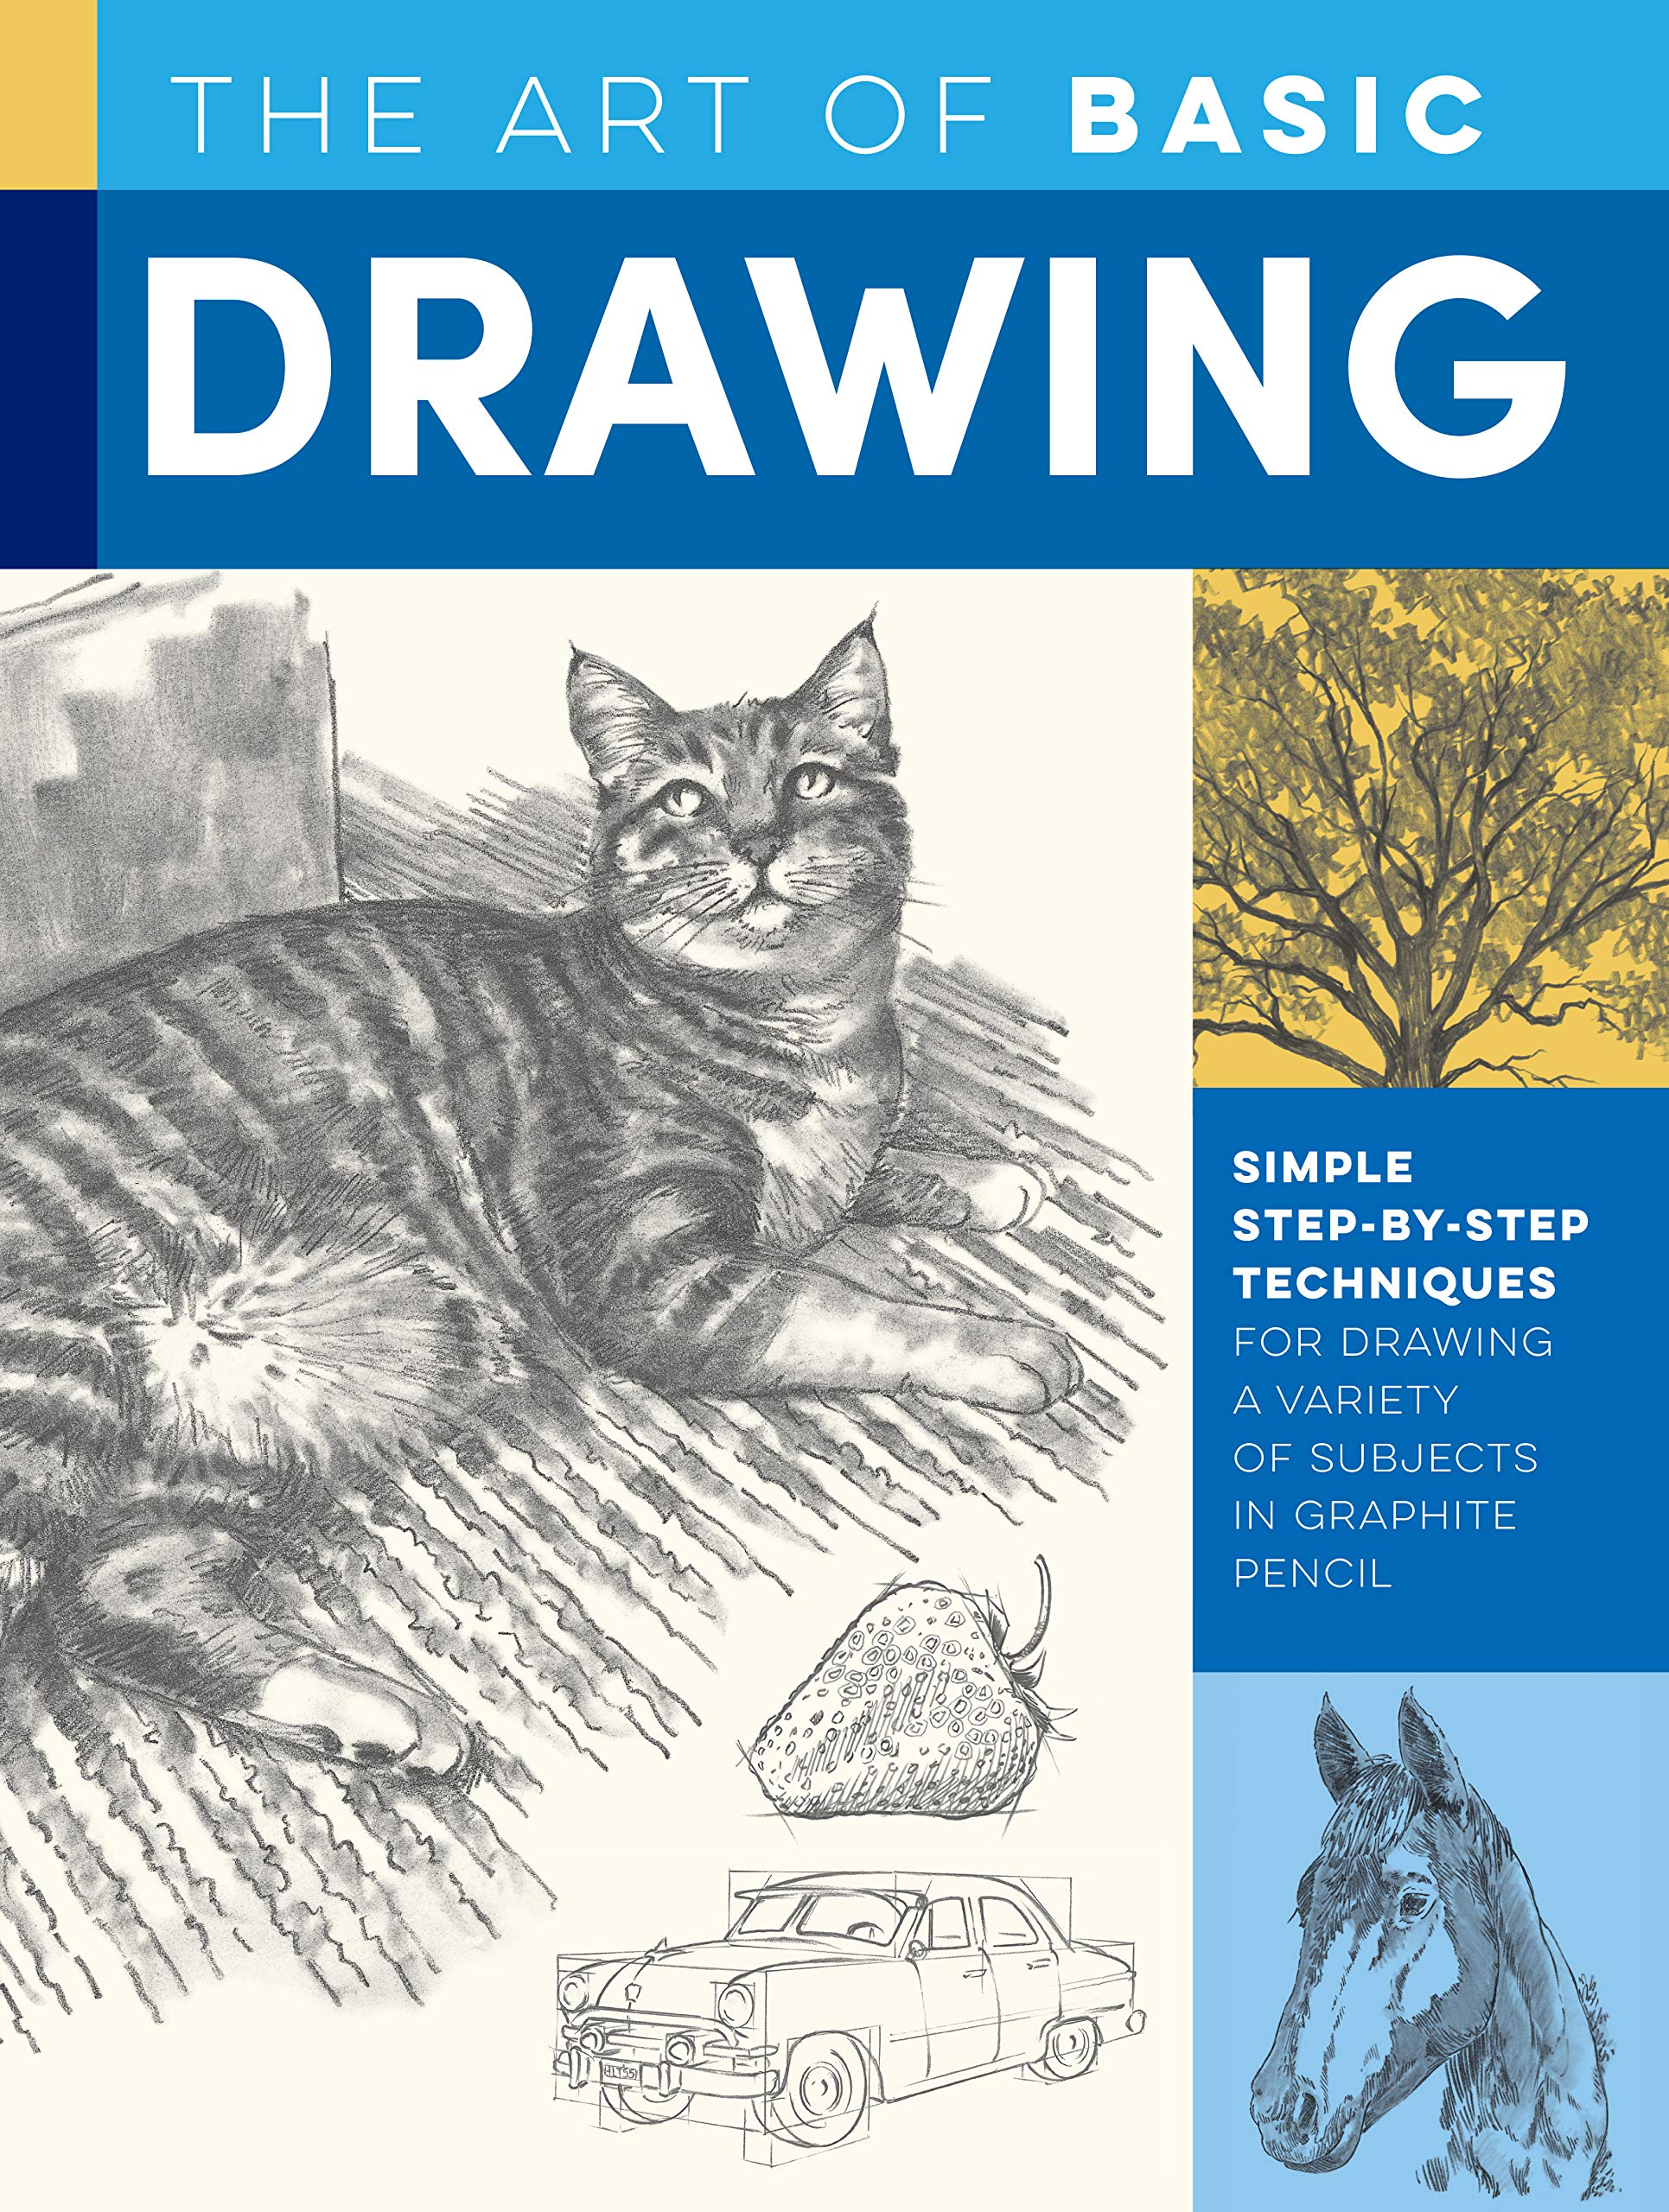 Art of Basic Drawing : Simple step-by-step techniques for drawing a variety of subjects, The